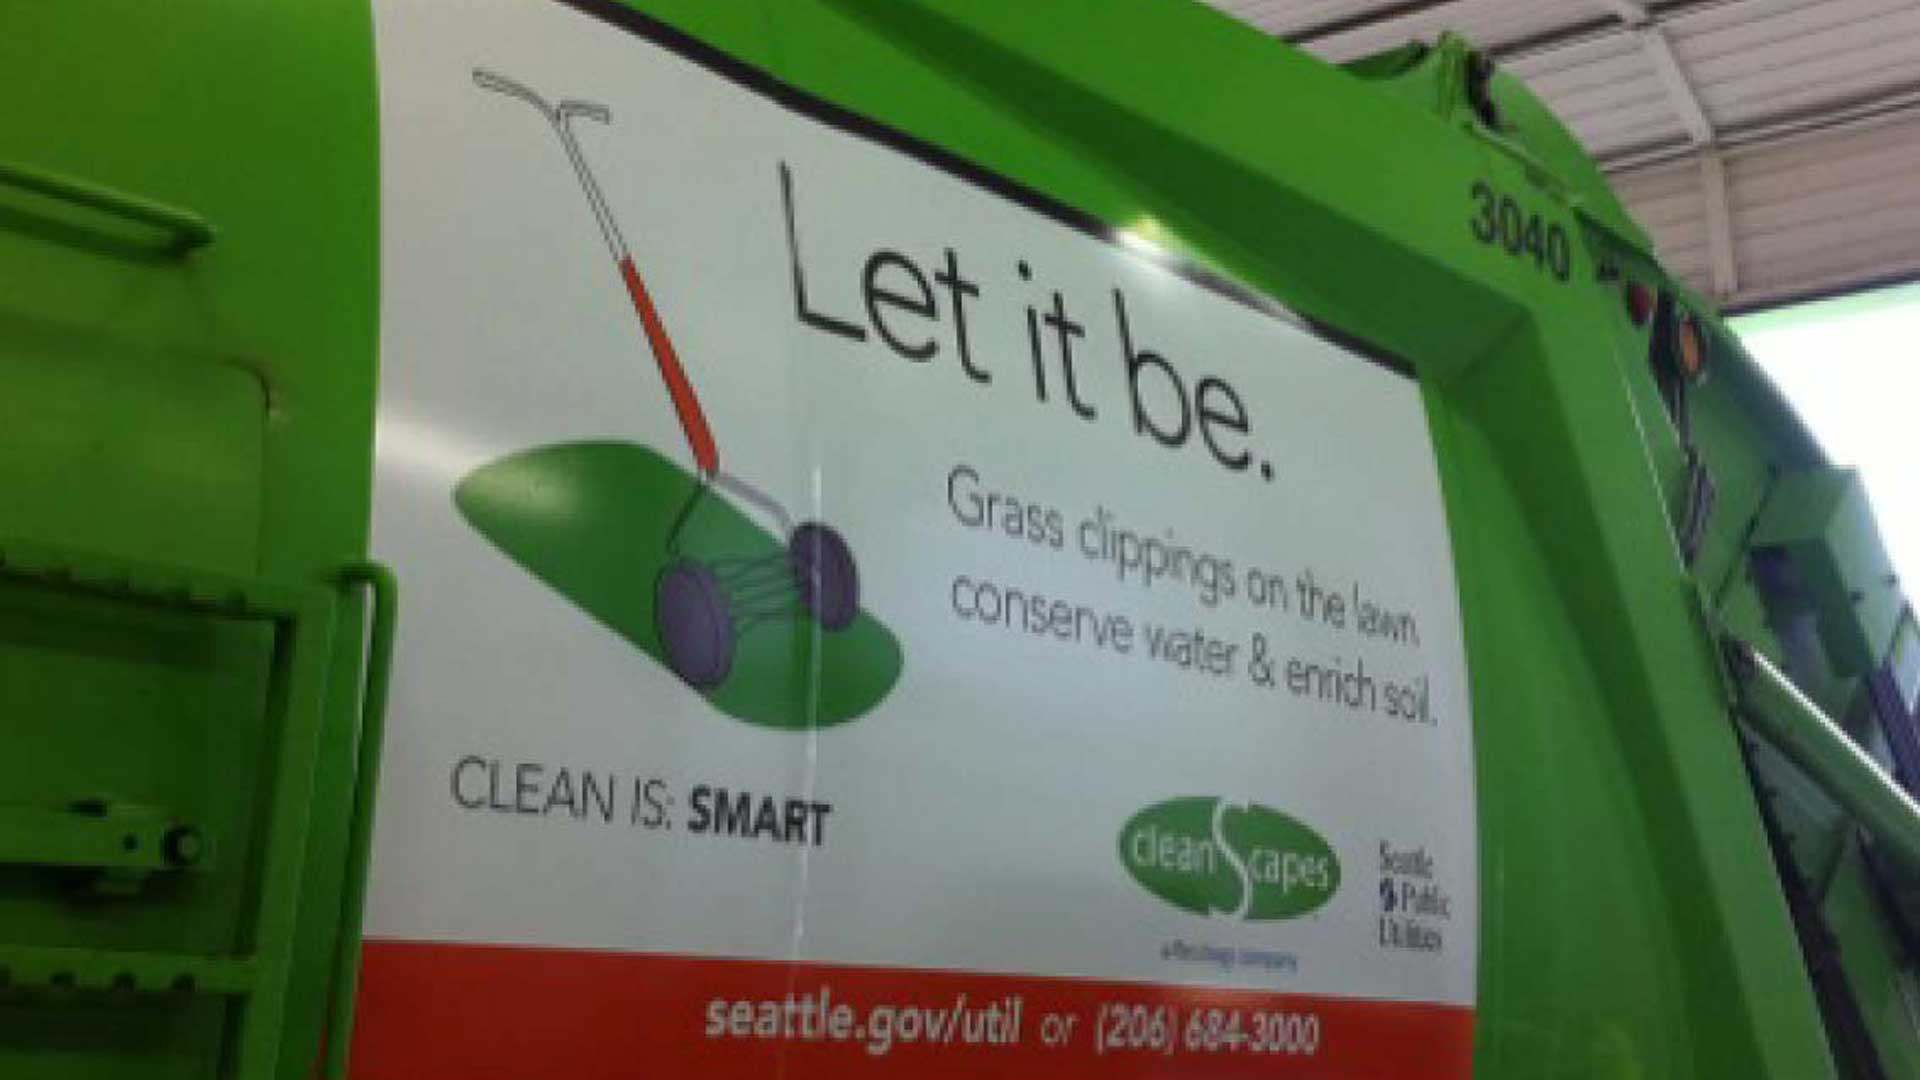 Large vinyl banner attached to side of waste disposal truck reading 'Let it be.' with illustration of manual grass mower and grass clippings.